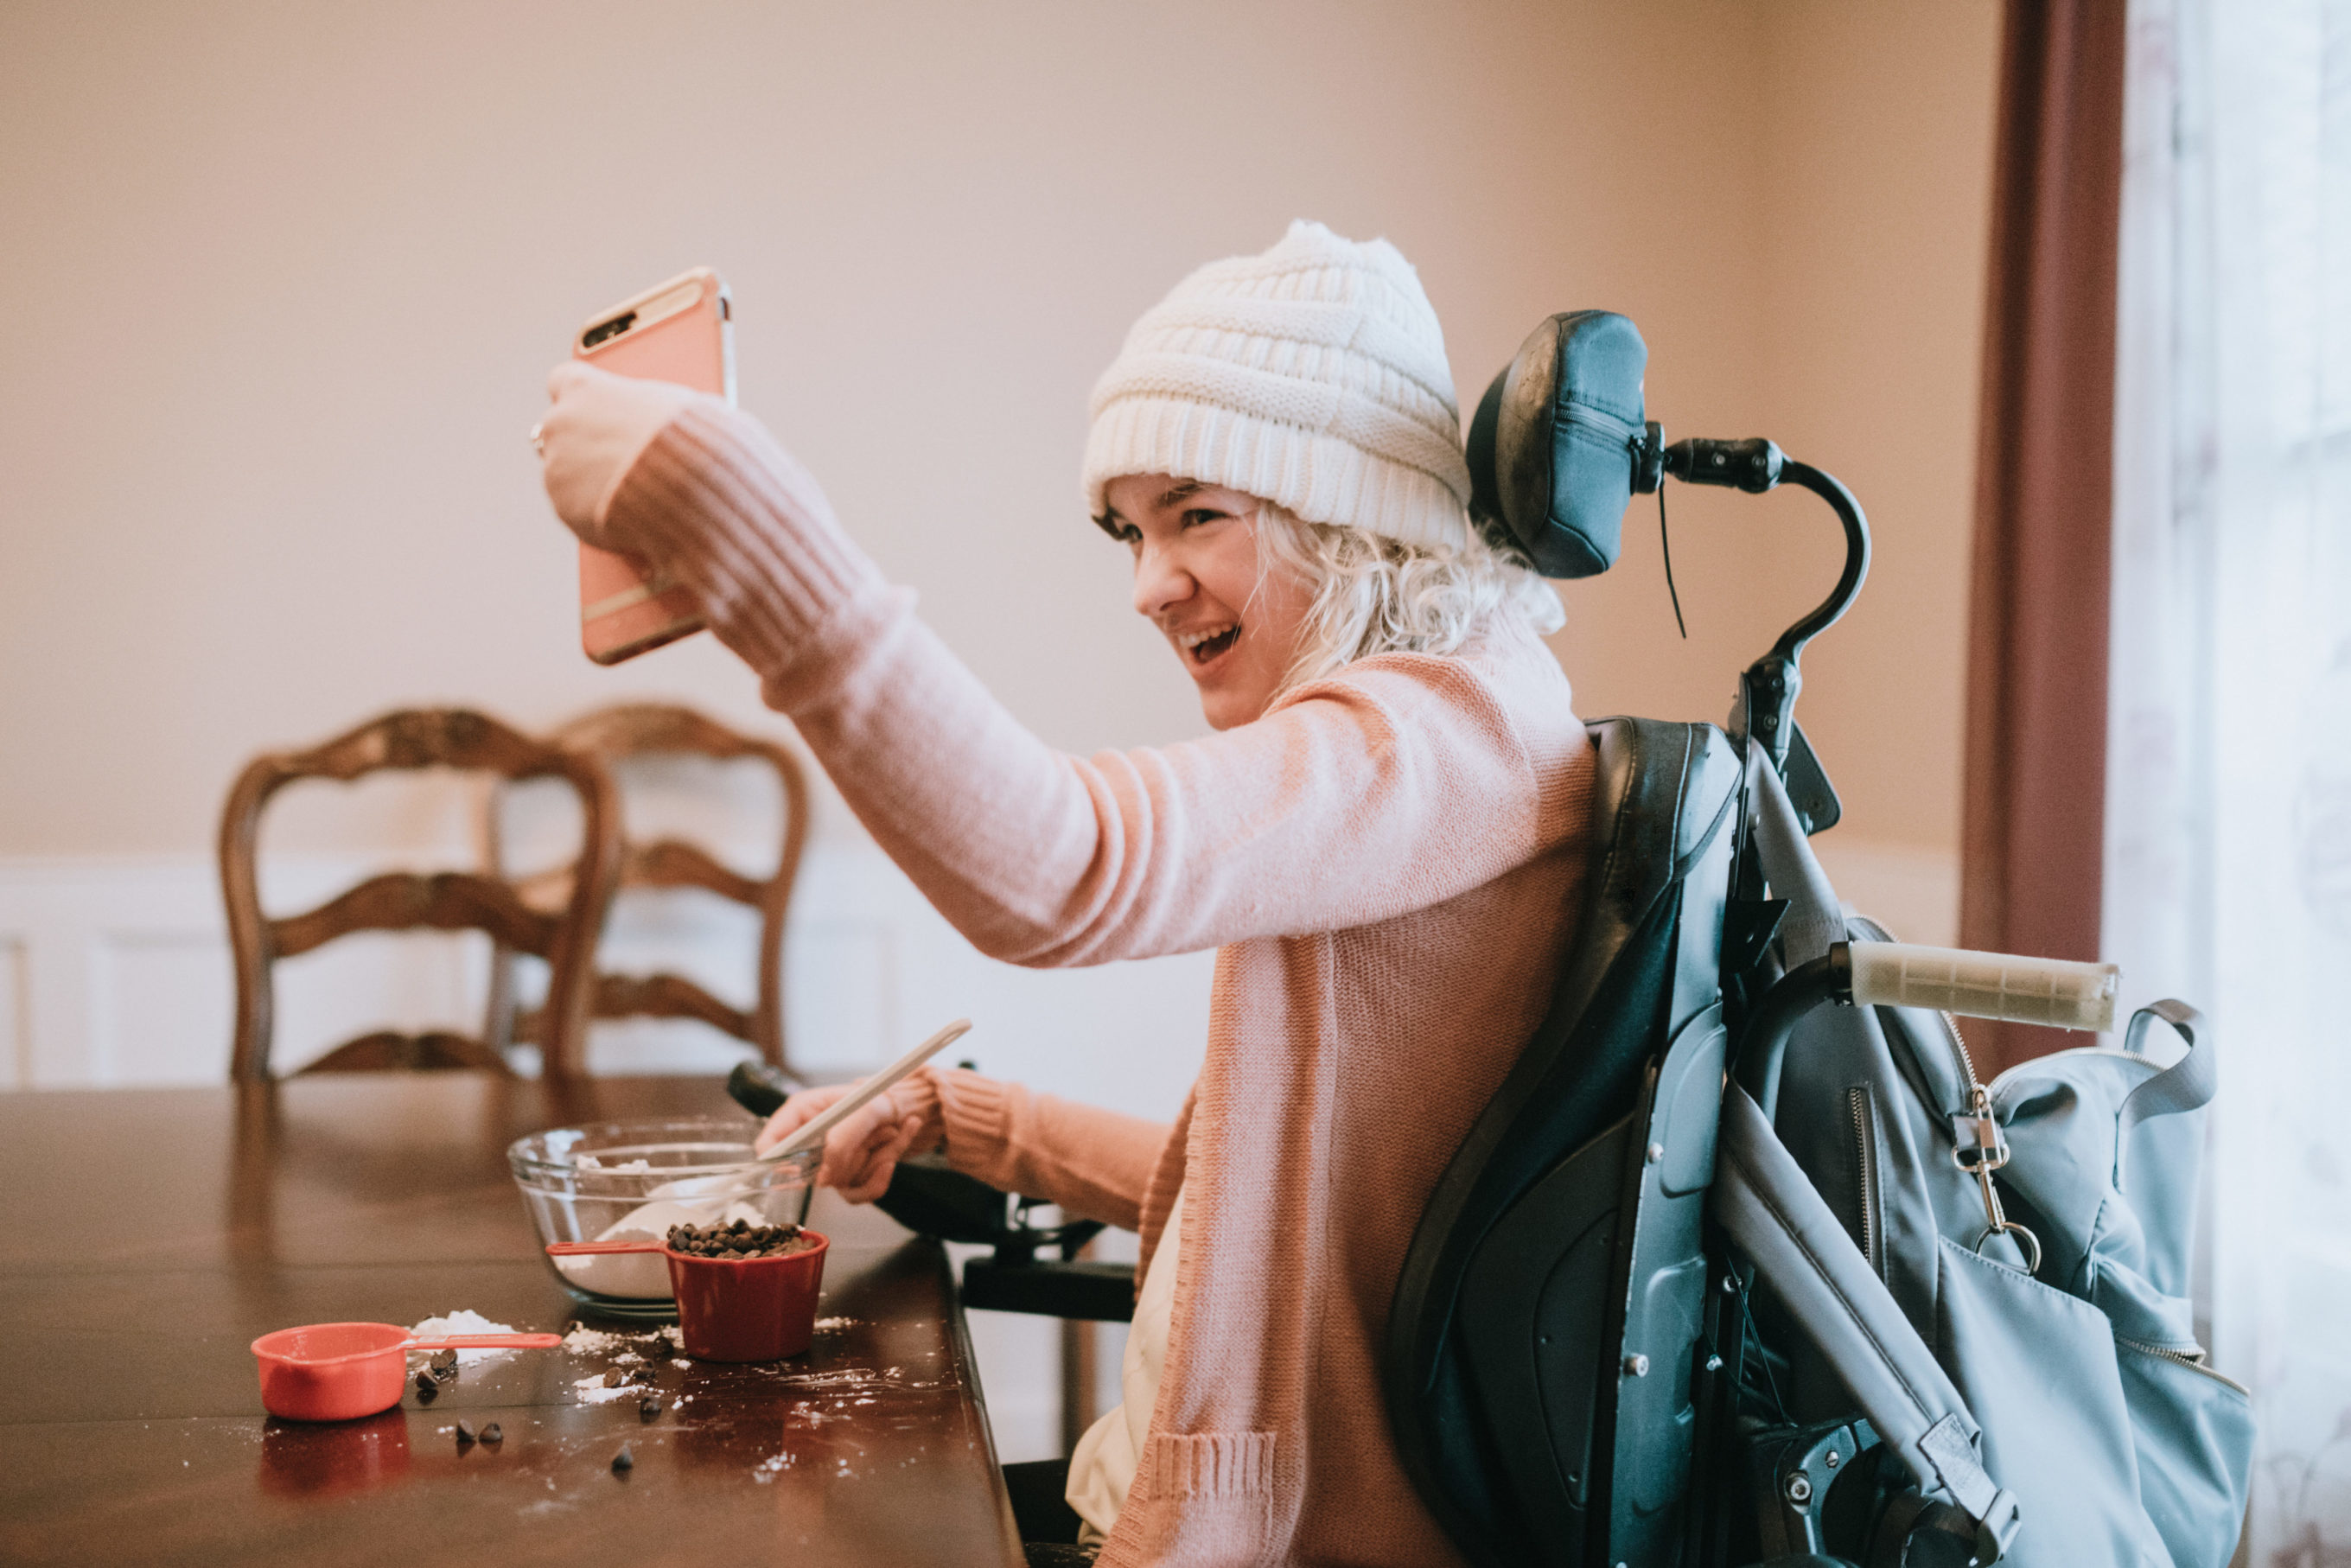 An independent young adult woman with cerebral palsy going about some of her daily routines at home.  She smiles for a self portrait with her smartphone while mixing together ingredients for making chocolate cookies.